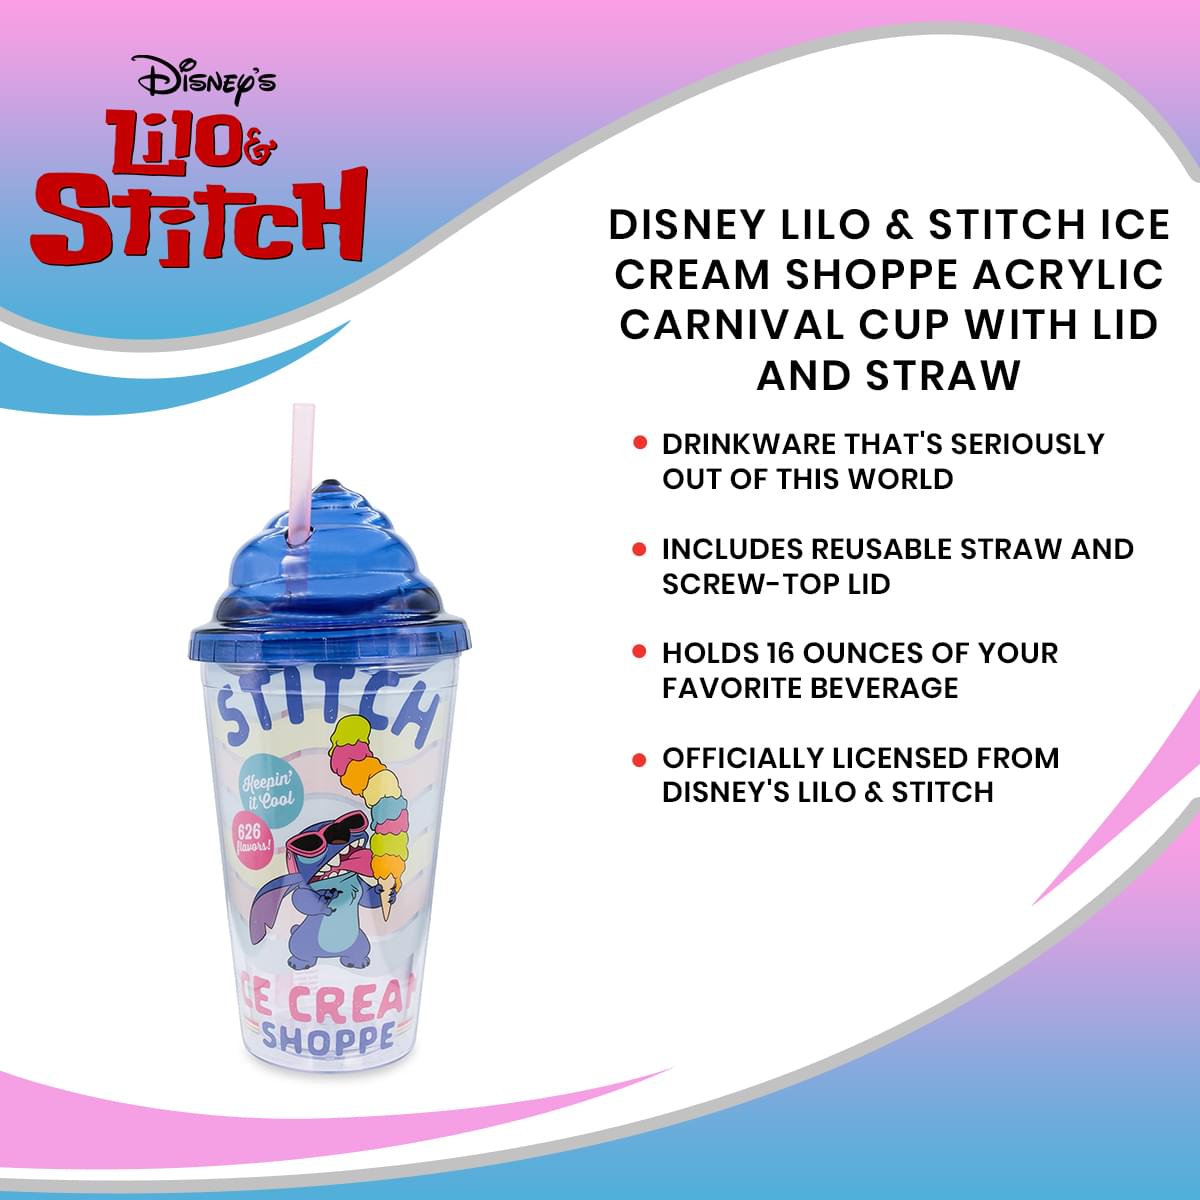 Disney Lilo & Stitch Ice Cream Shoppe Acrylic Carnival Cup with Lid and Straw